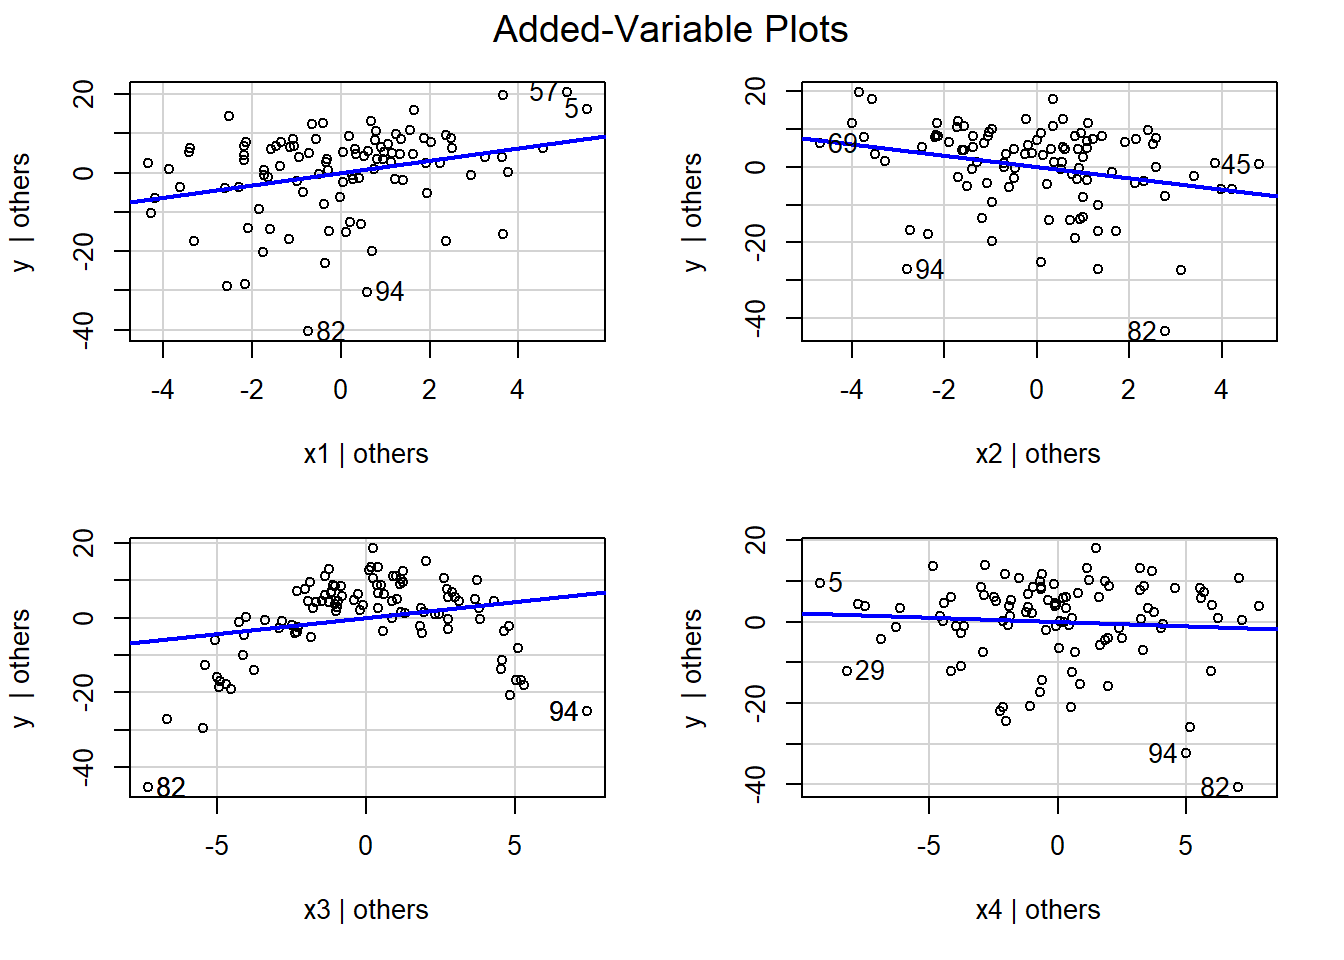 Added variable plots using the partialr data set in the Data4Ecologists package (Fieberg, 2021) calculated using the avplots function in the car package (Fox & Weisberg, 2019).